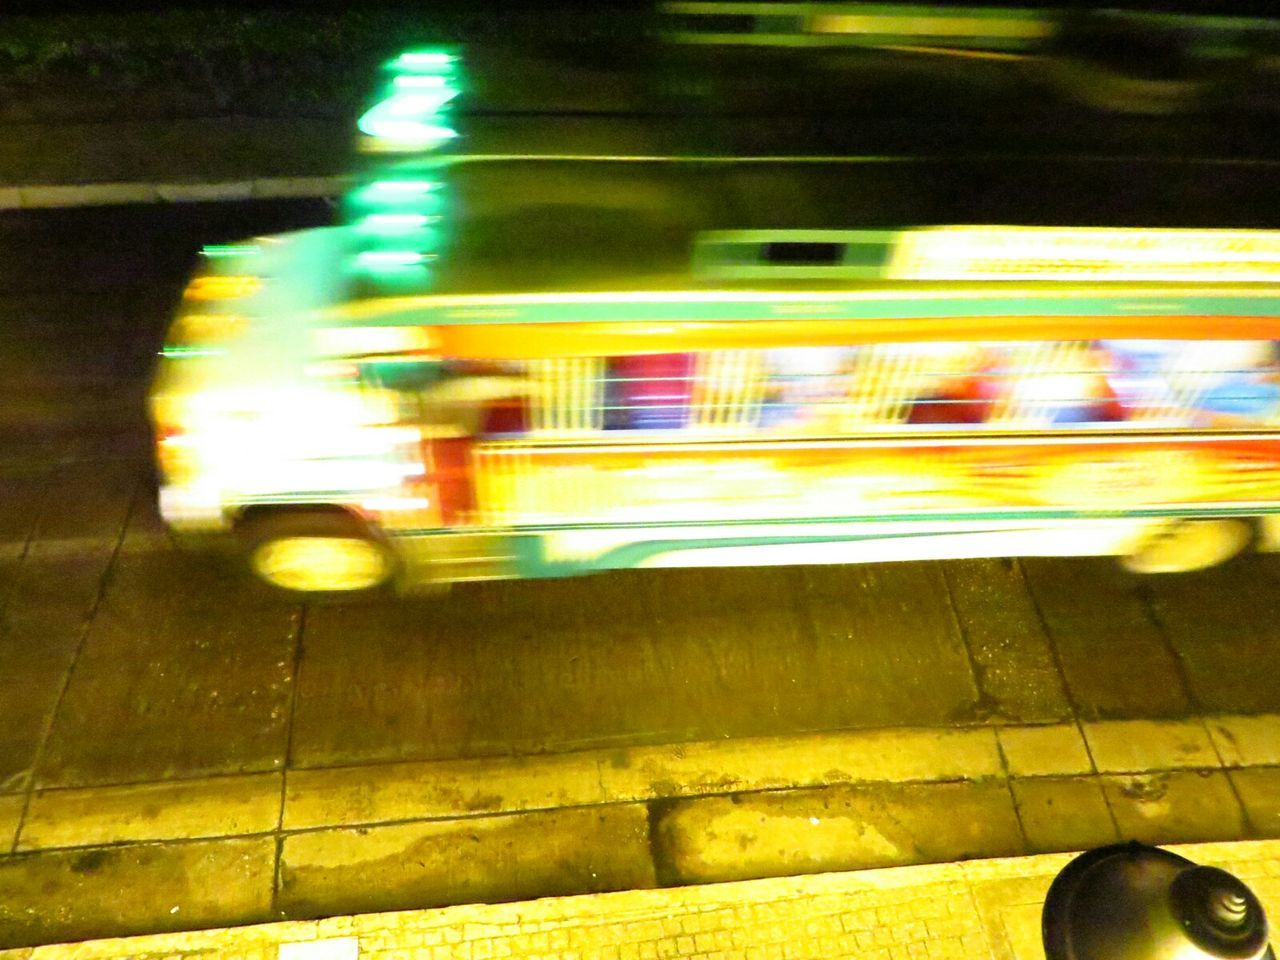 Blurred vehicles on road at night